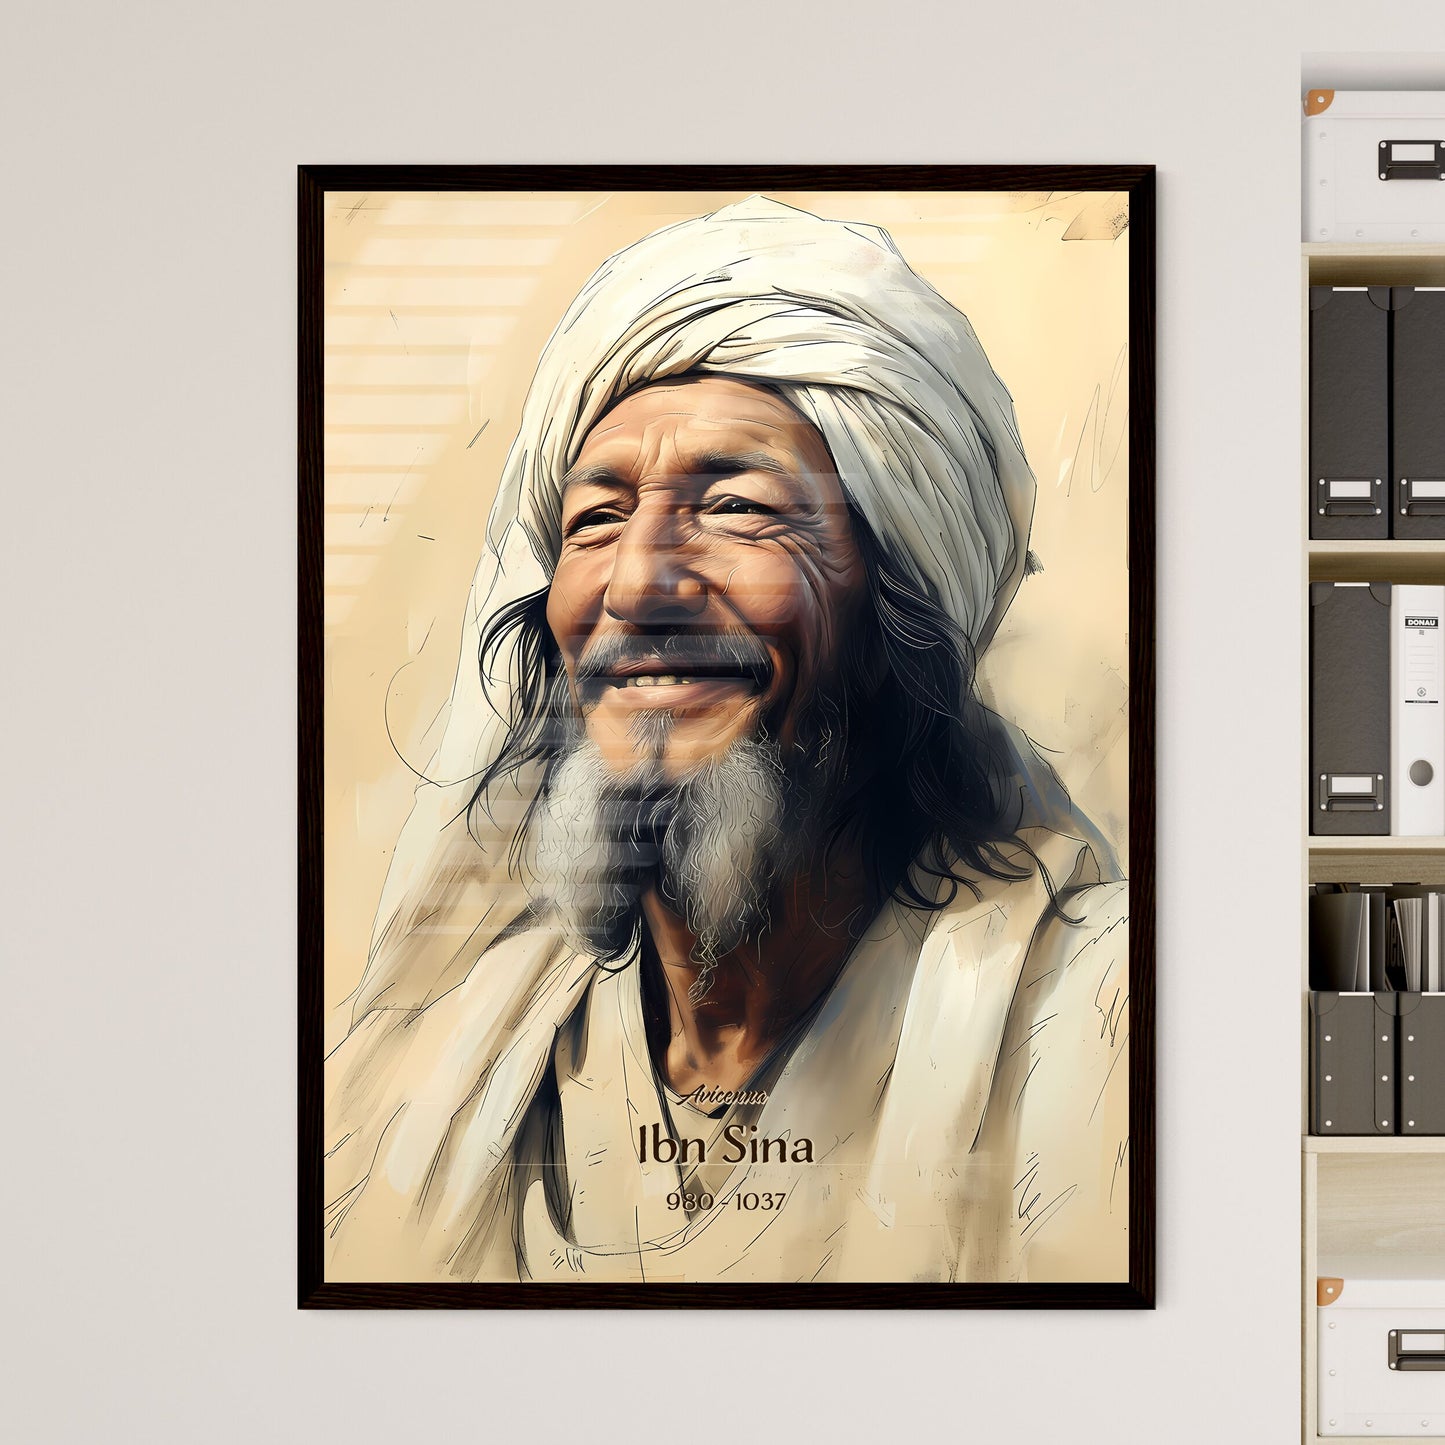 Avicenna, Ibn Sina, 980 - 1037, A Poster of a man with a beard and a white turban Default Title